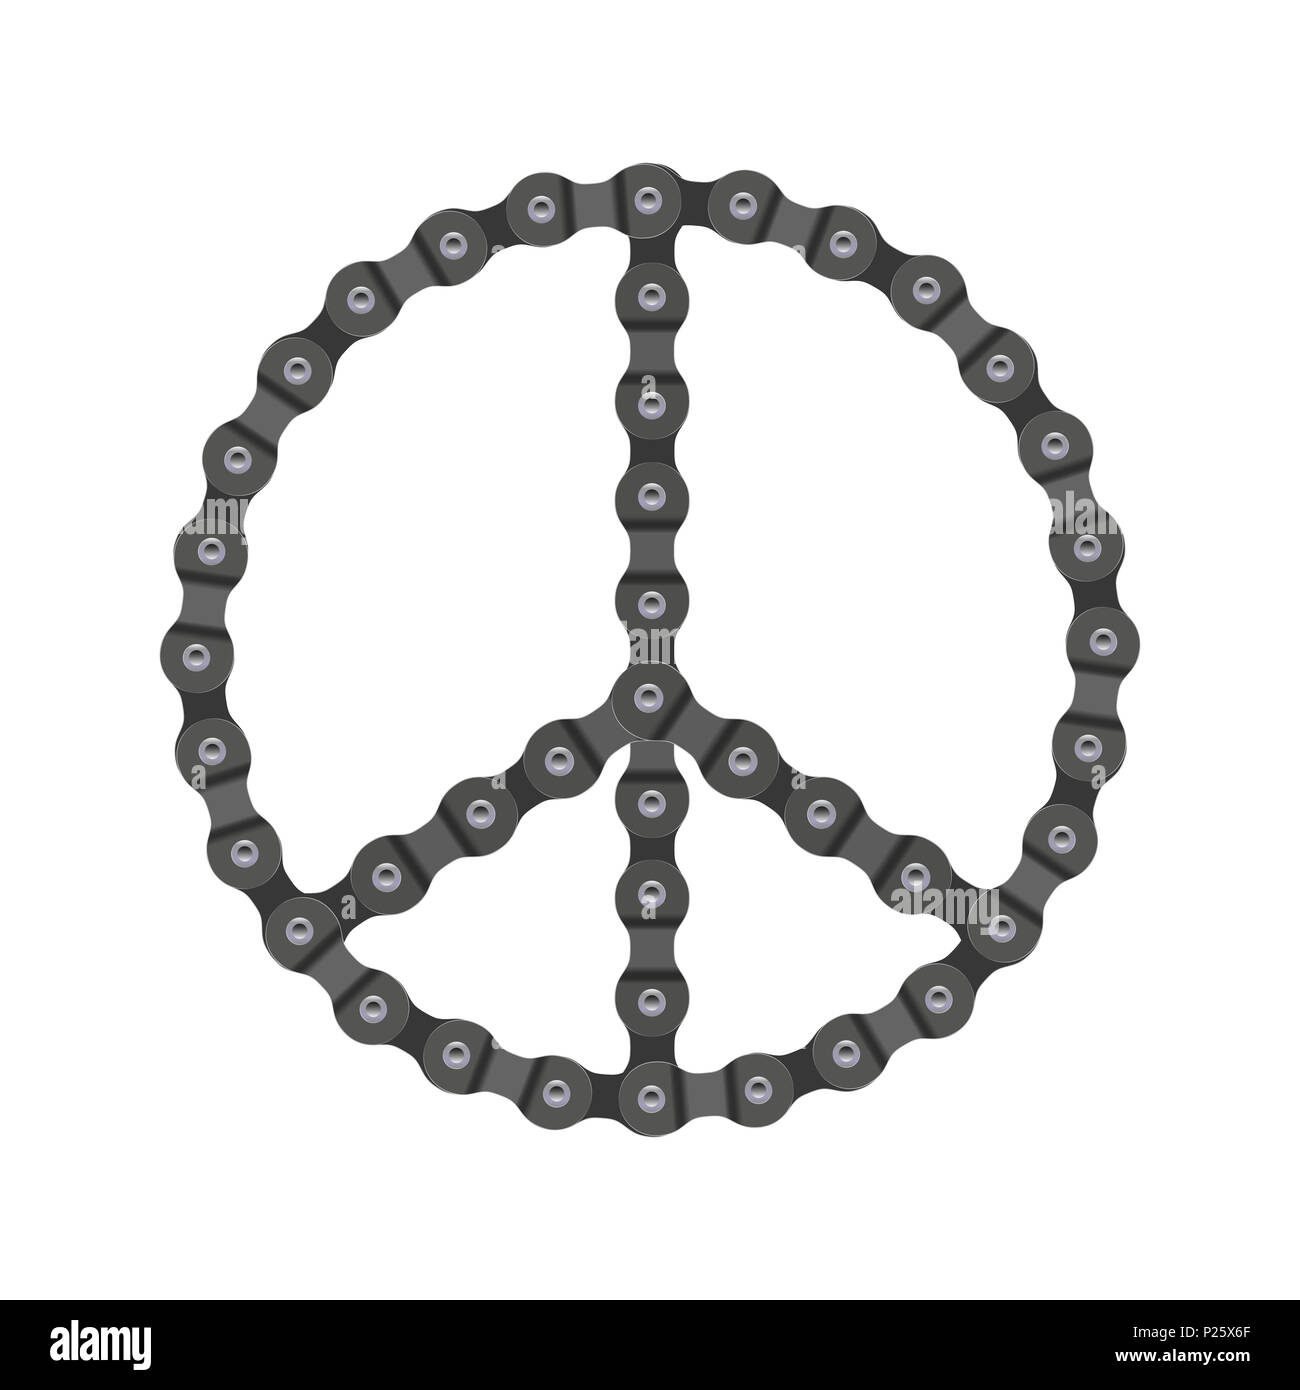 Peace Sign Made of Bike or Bicycle Chain. Realistic Detailed Bike Chain. Stock Photo